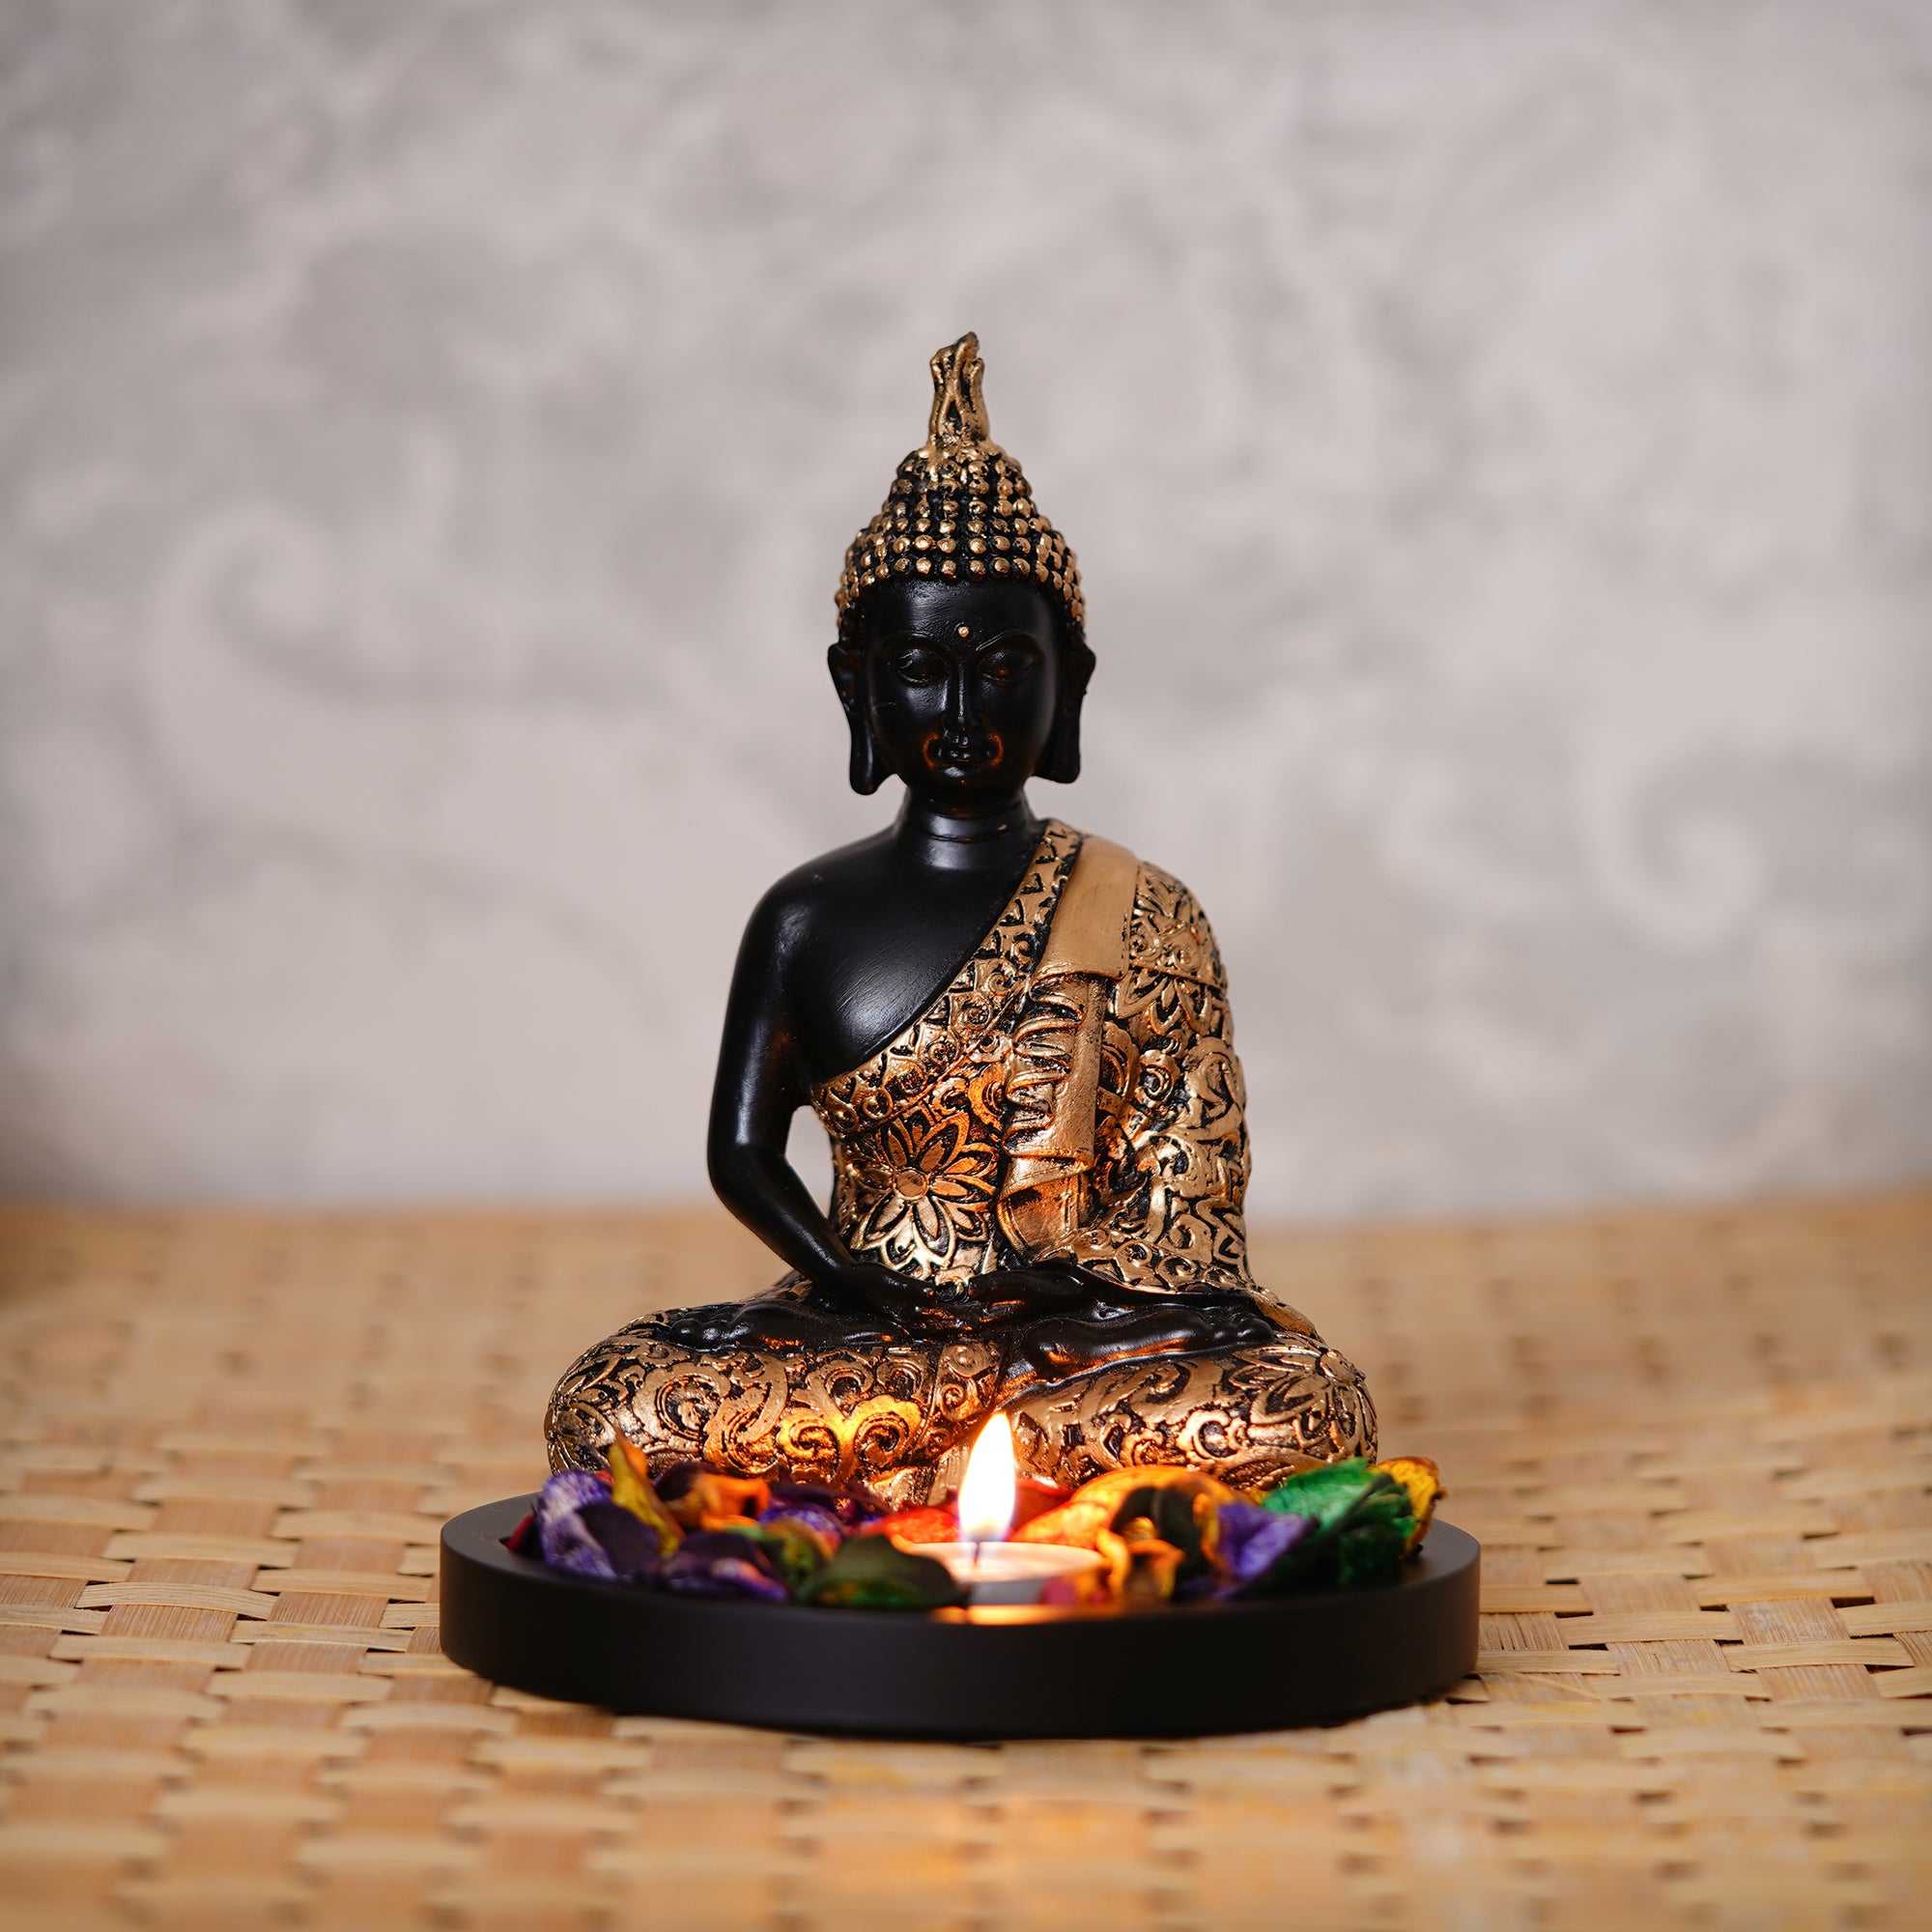 Handcrafted Meditating Golden Buddha Statue with Wooden Base, Fragranced Petals and Tealight